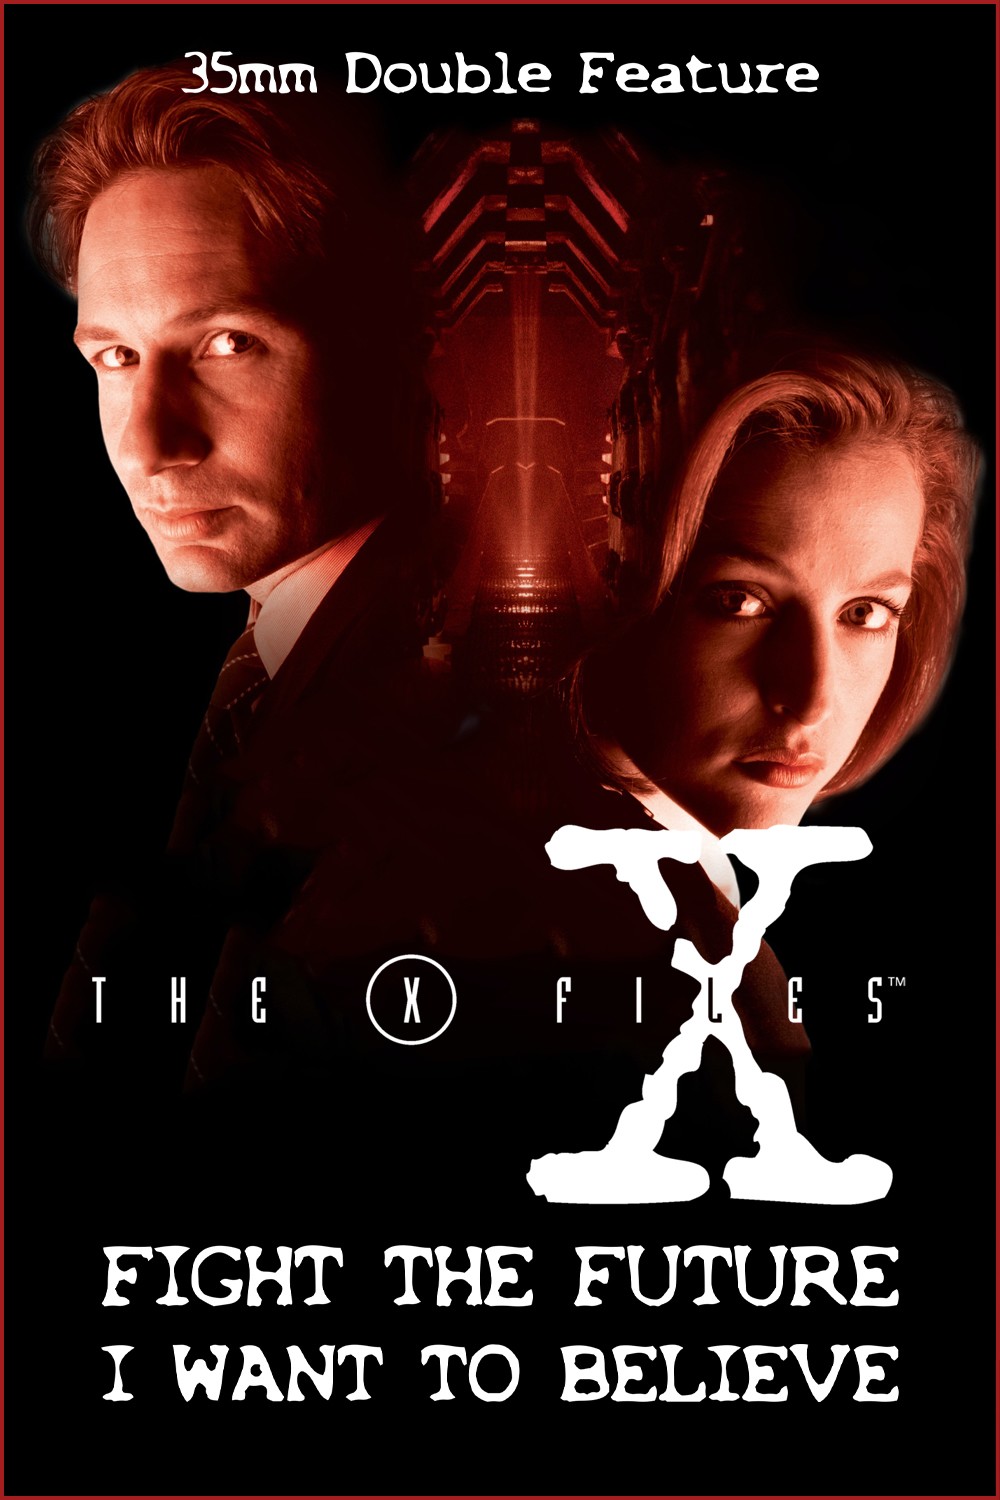 THE X-FILES DOUBLE FEATURE